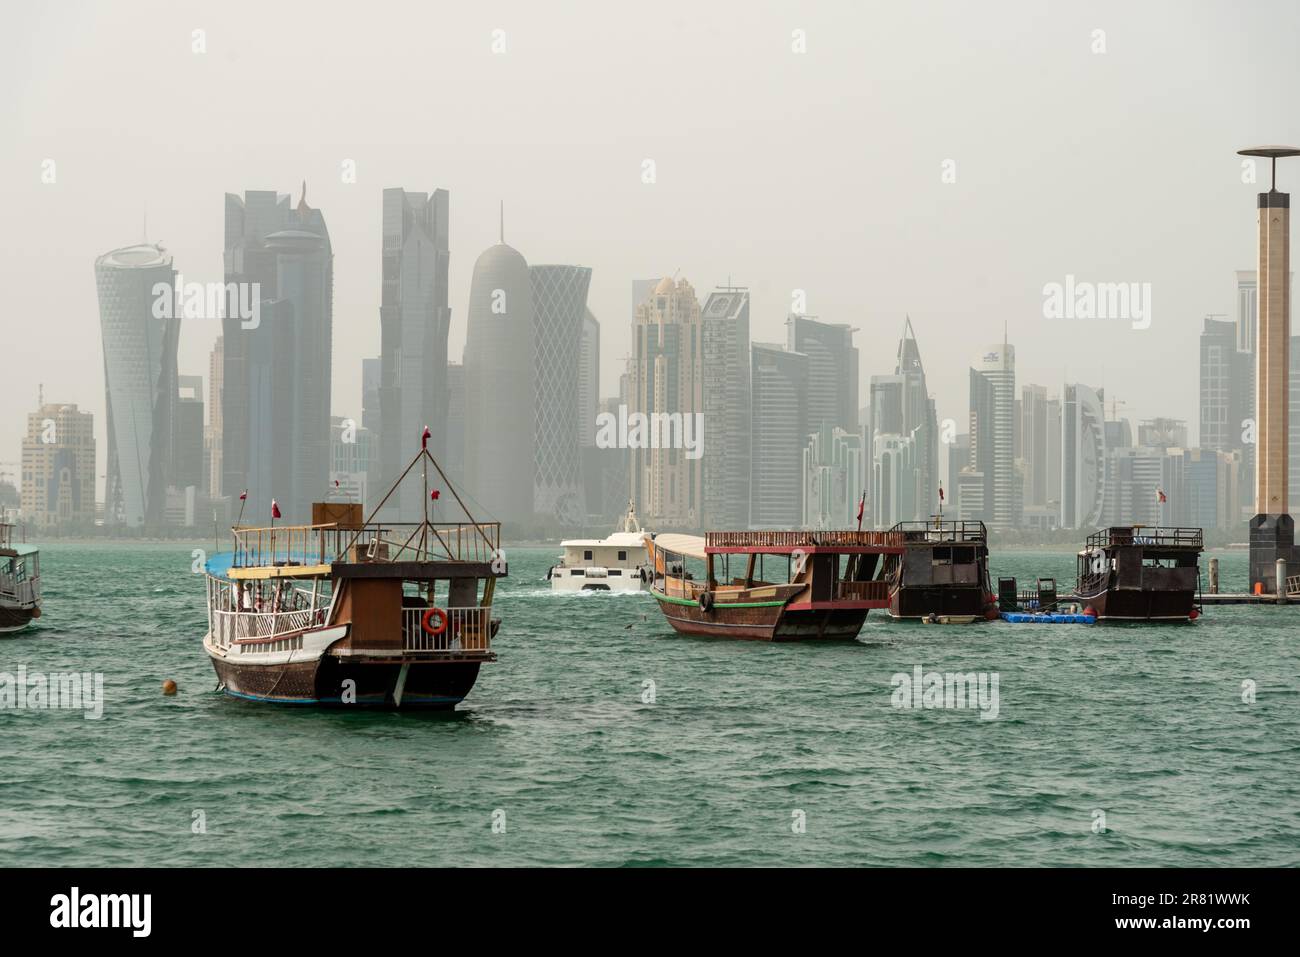 Traditional dhow pearl fishing boat at The Corniche with skyscrapers misty view in the background , Doha, Qatar Stock Photo